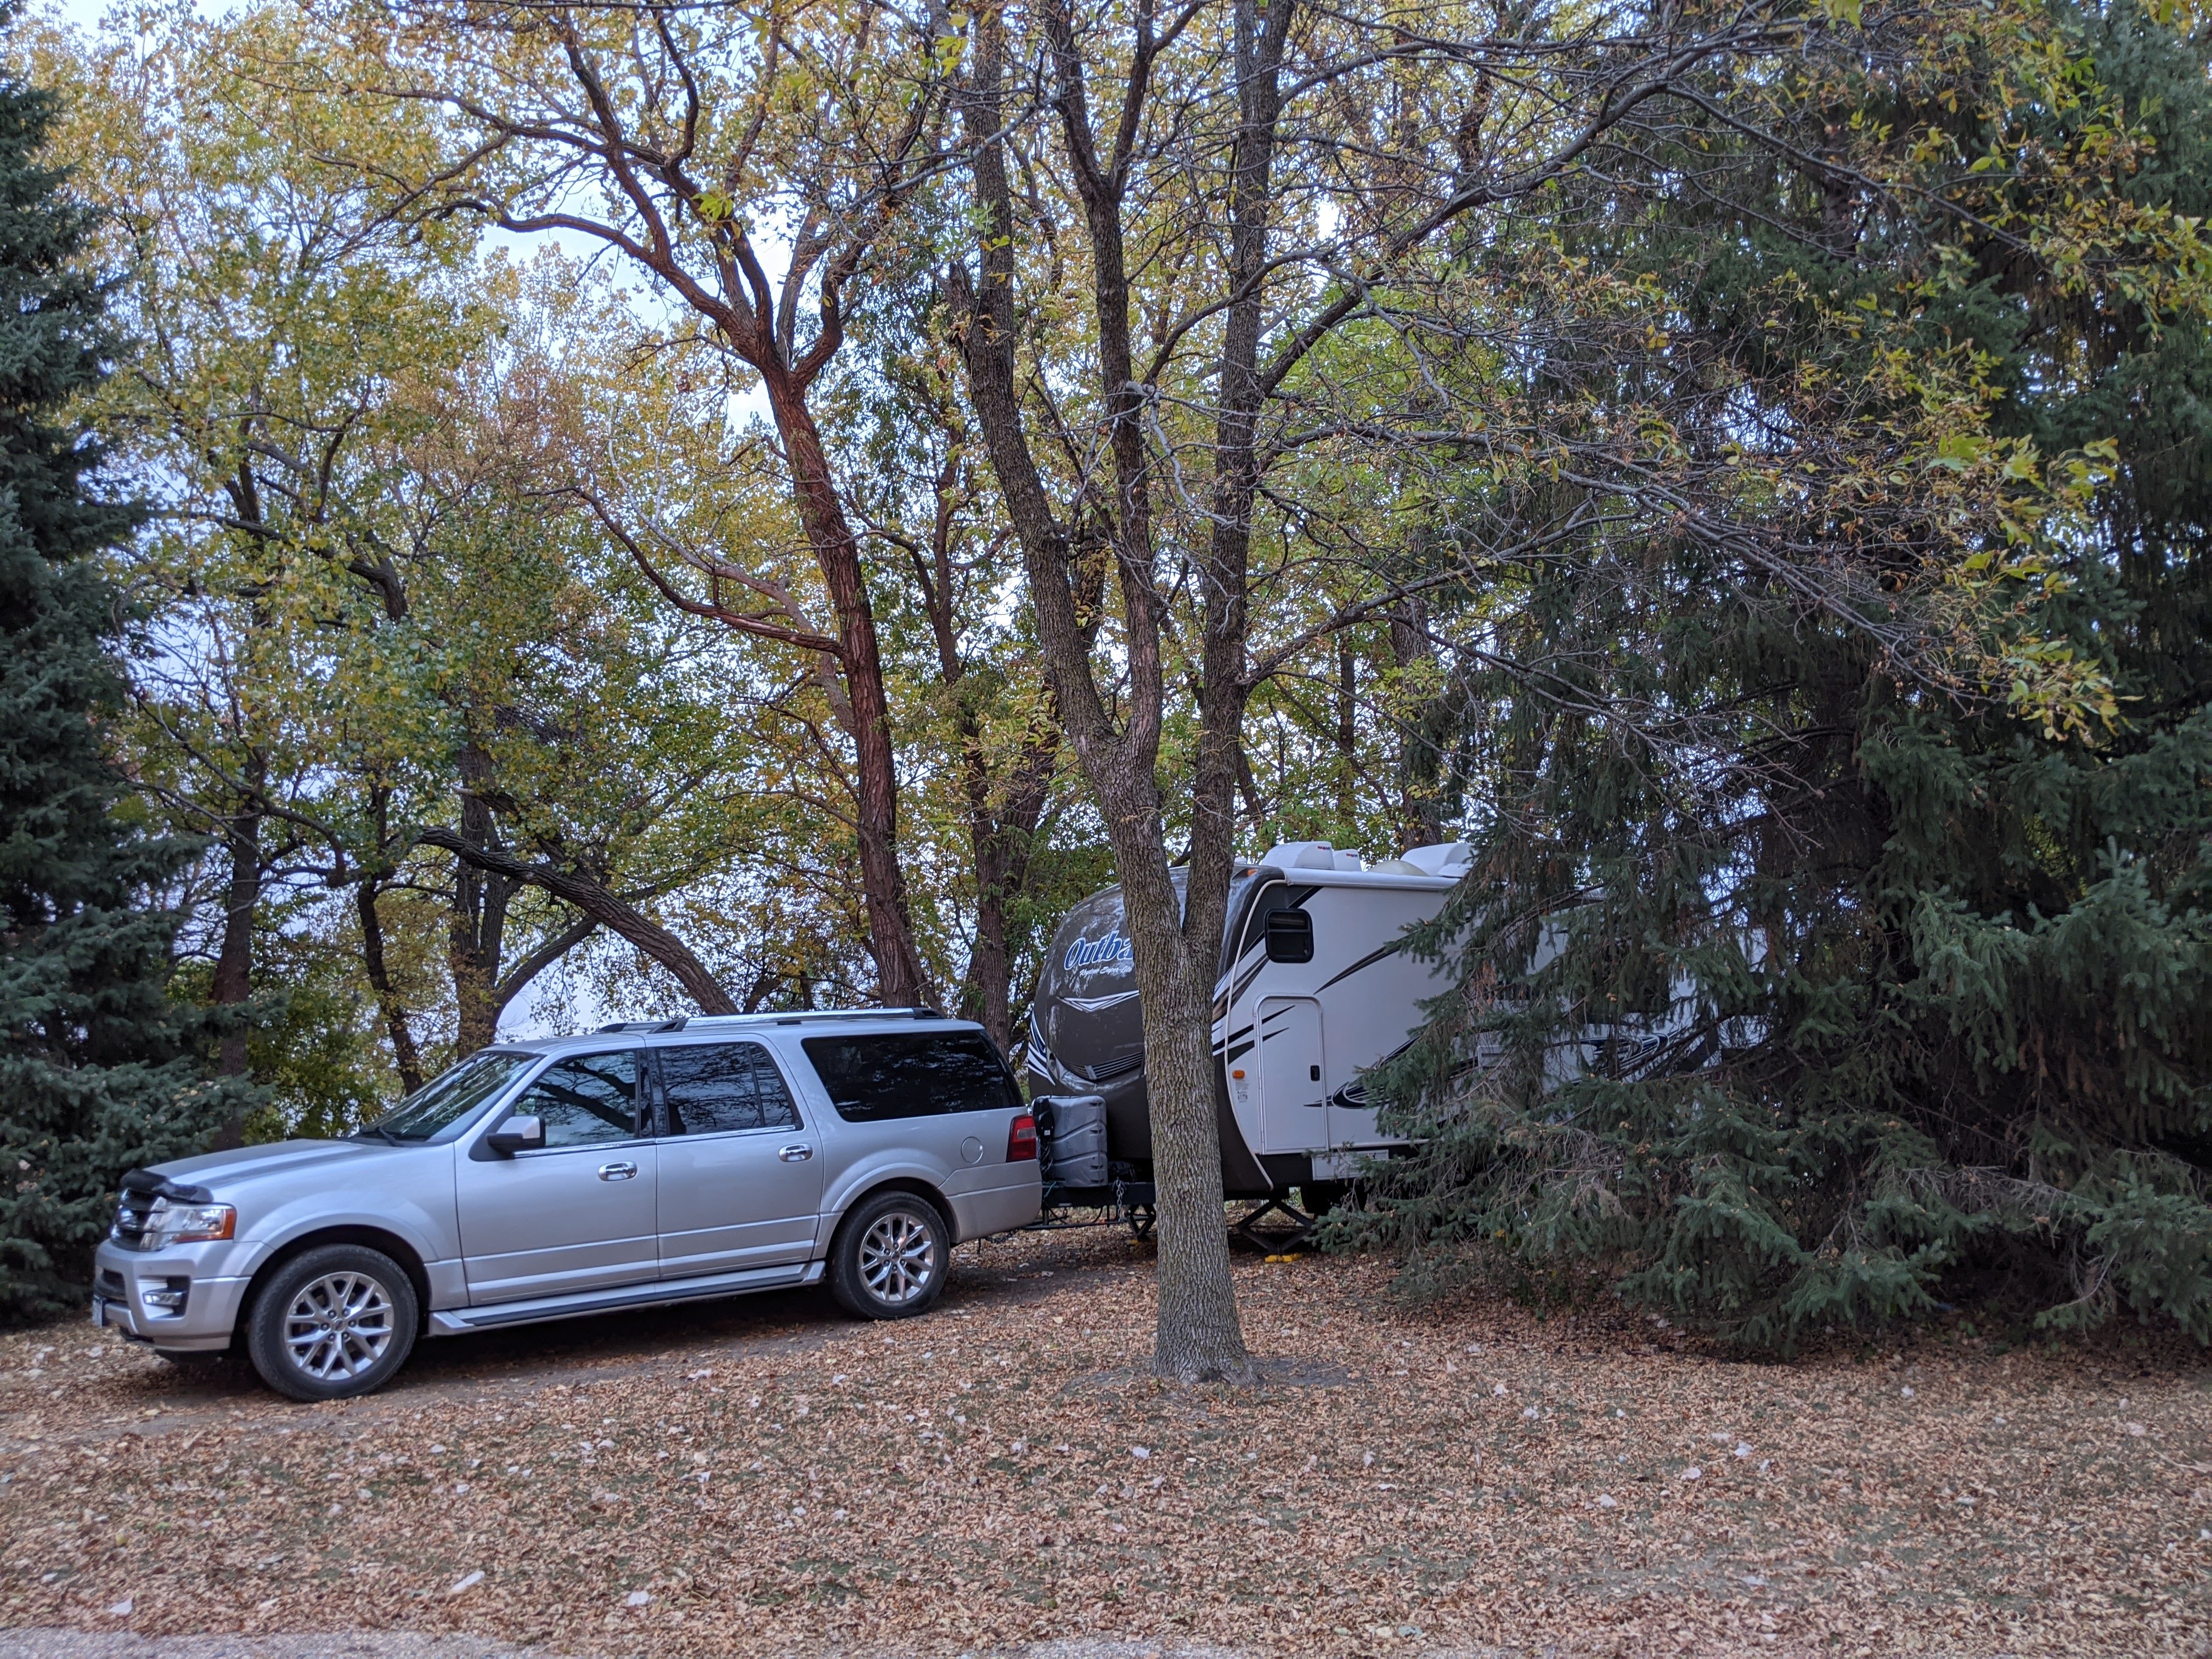 rig nestled in trees in park site